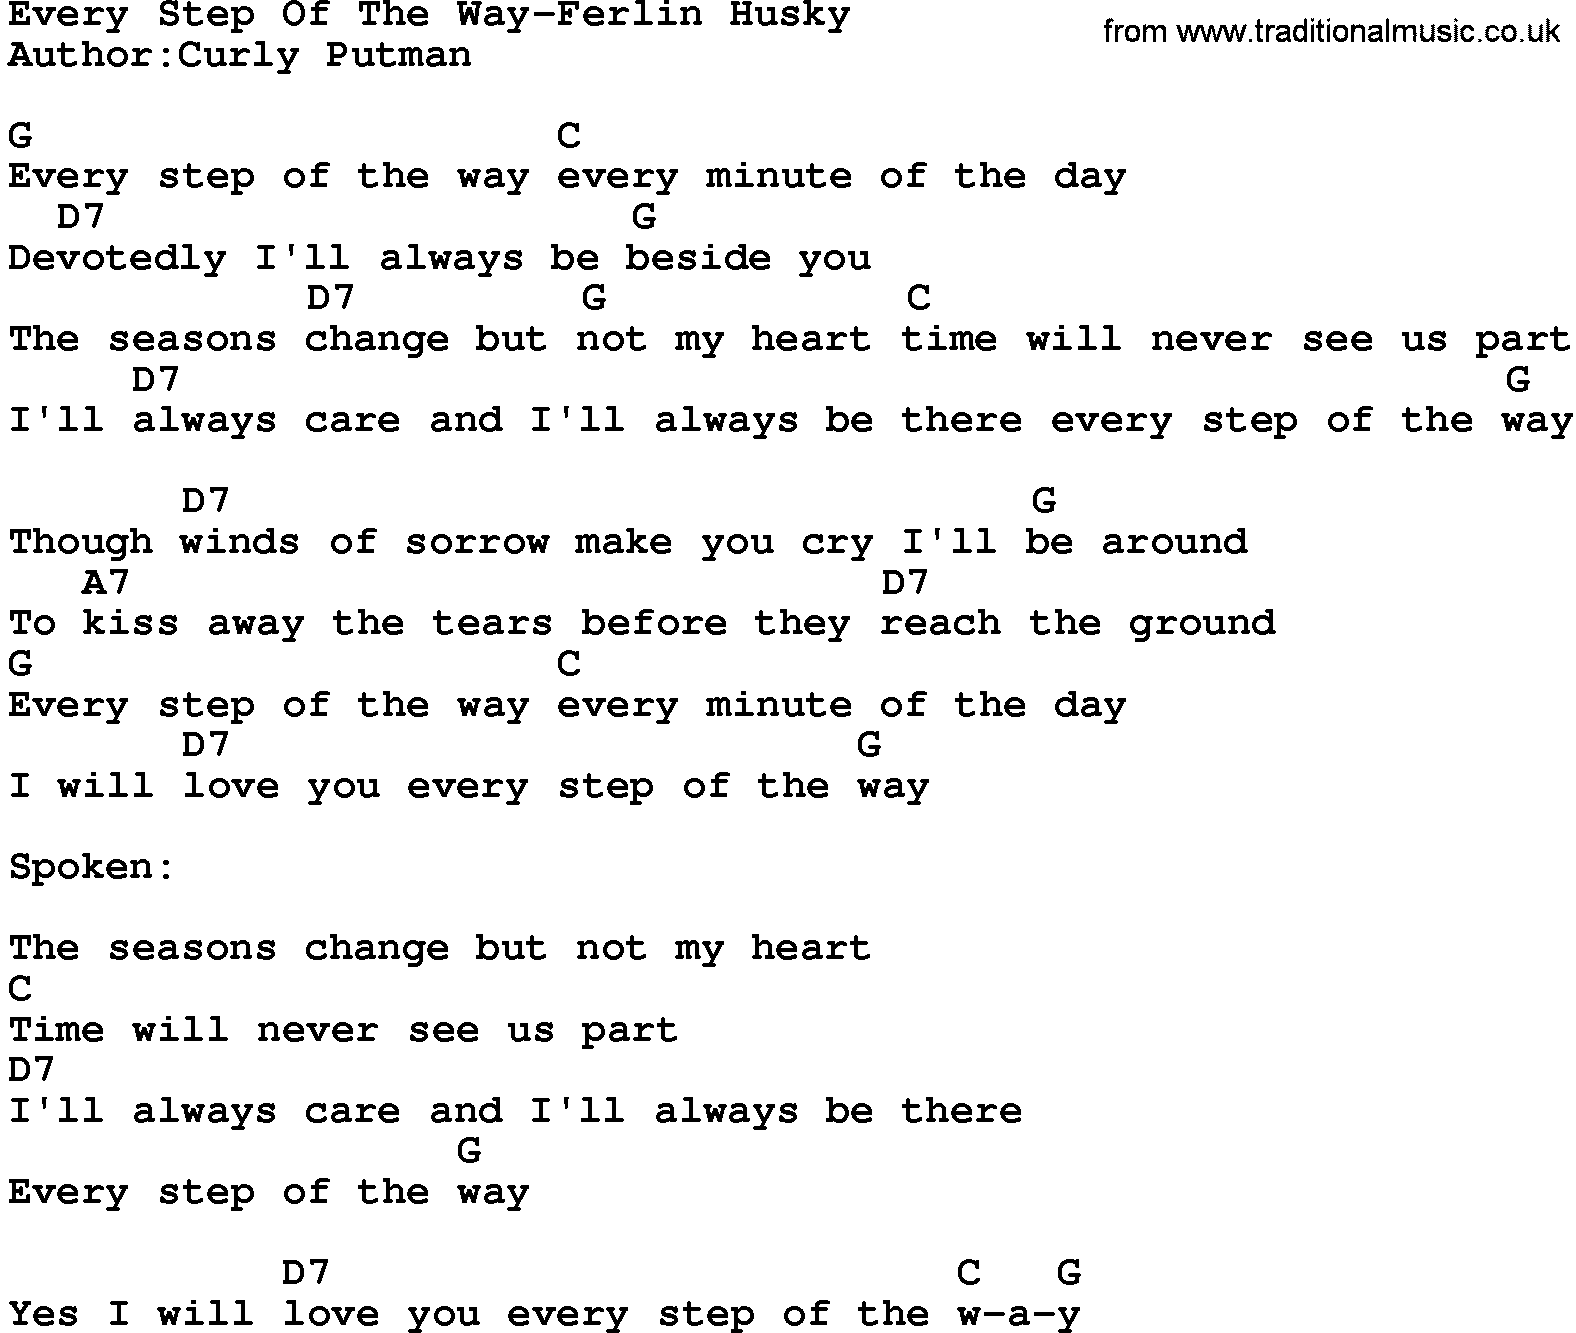 Country music song: Every Step Of The Way-Ferlin Husky lyrics and chords